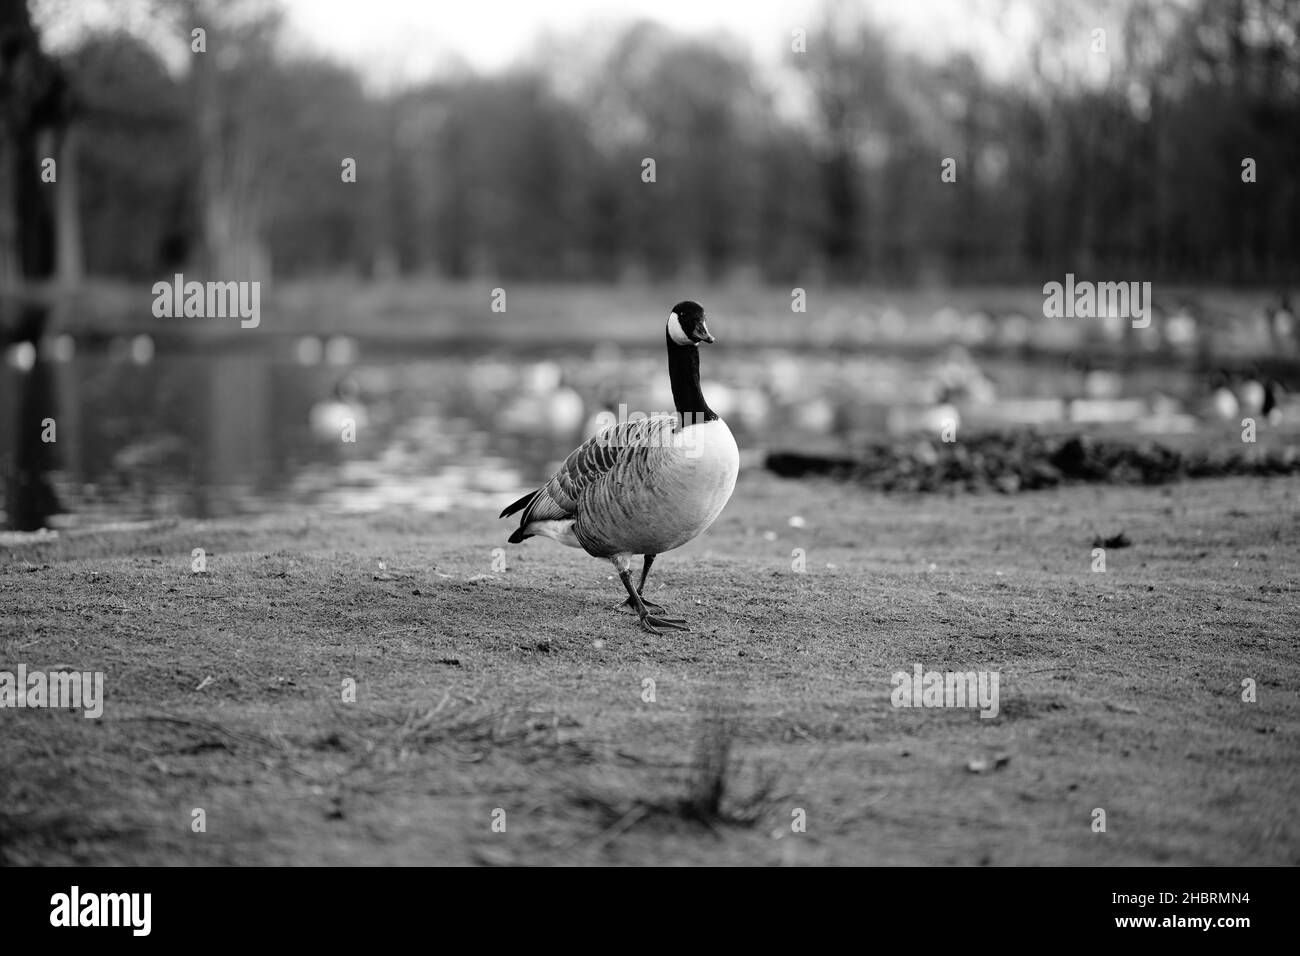 canada goose by the lakeside monochrome image Stock Photo